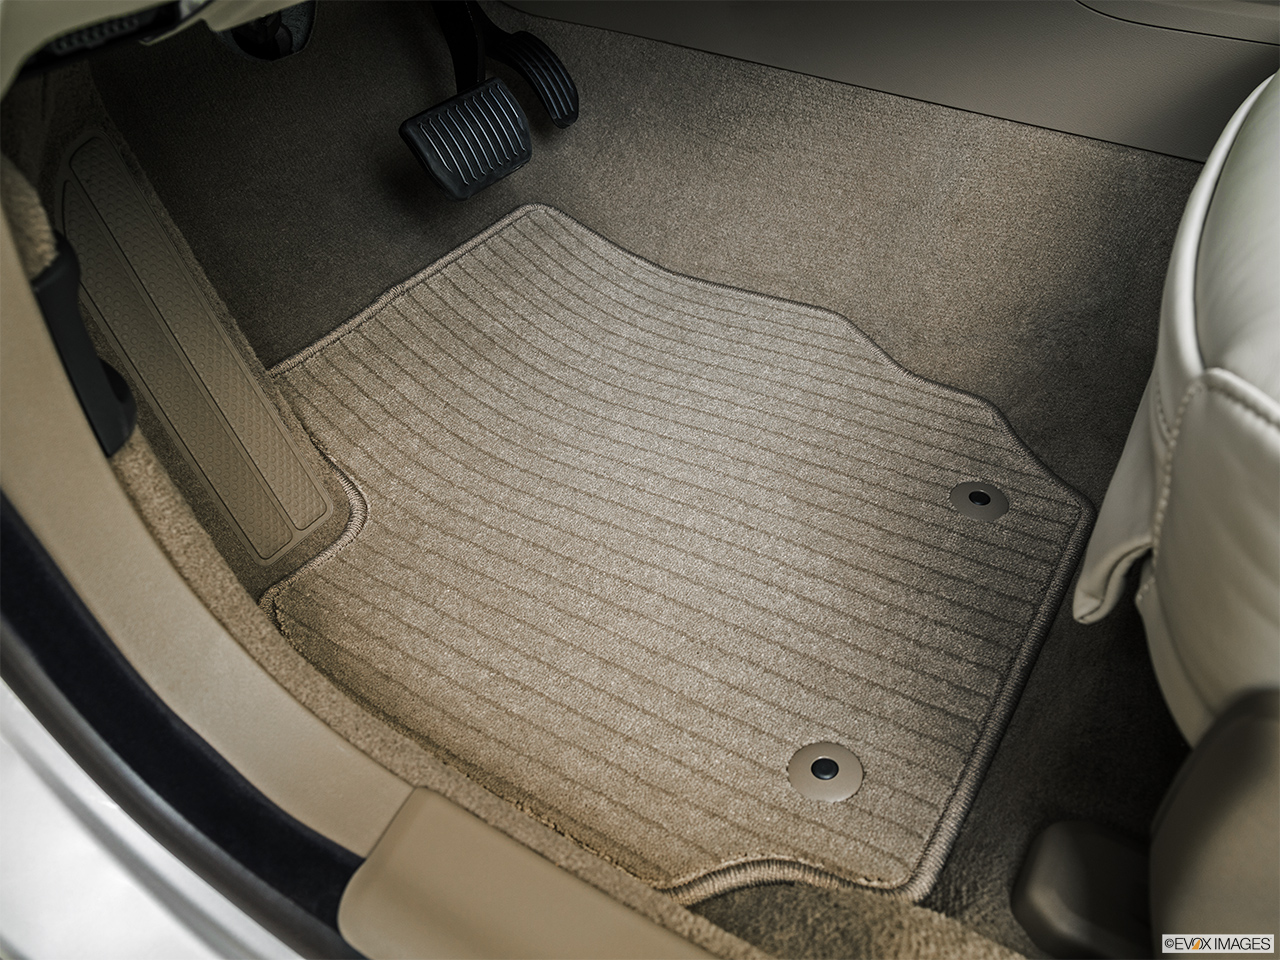 2015 Volvo S80 T5 Drive-E FWD Driver's floor mat and pedals. Mid-seat level from outside looking in. 